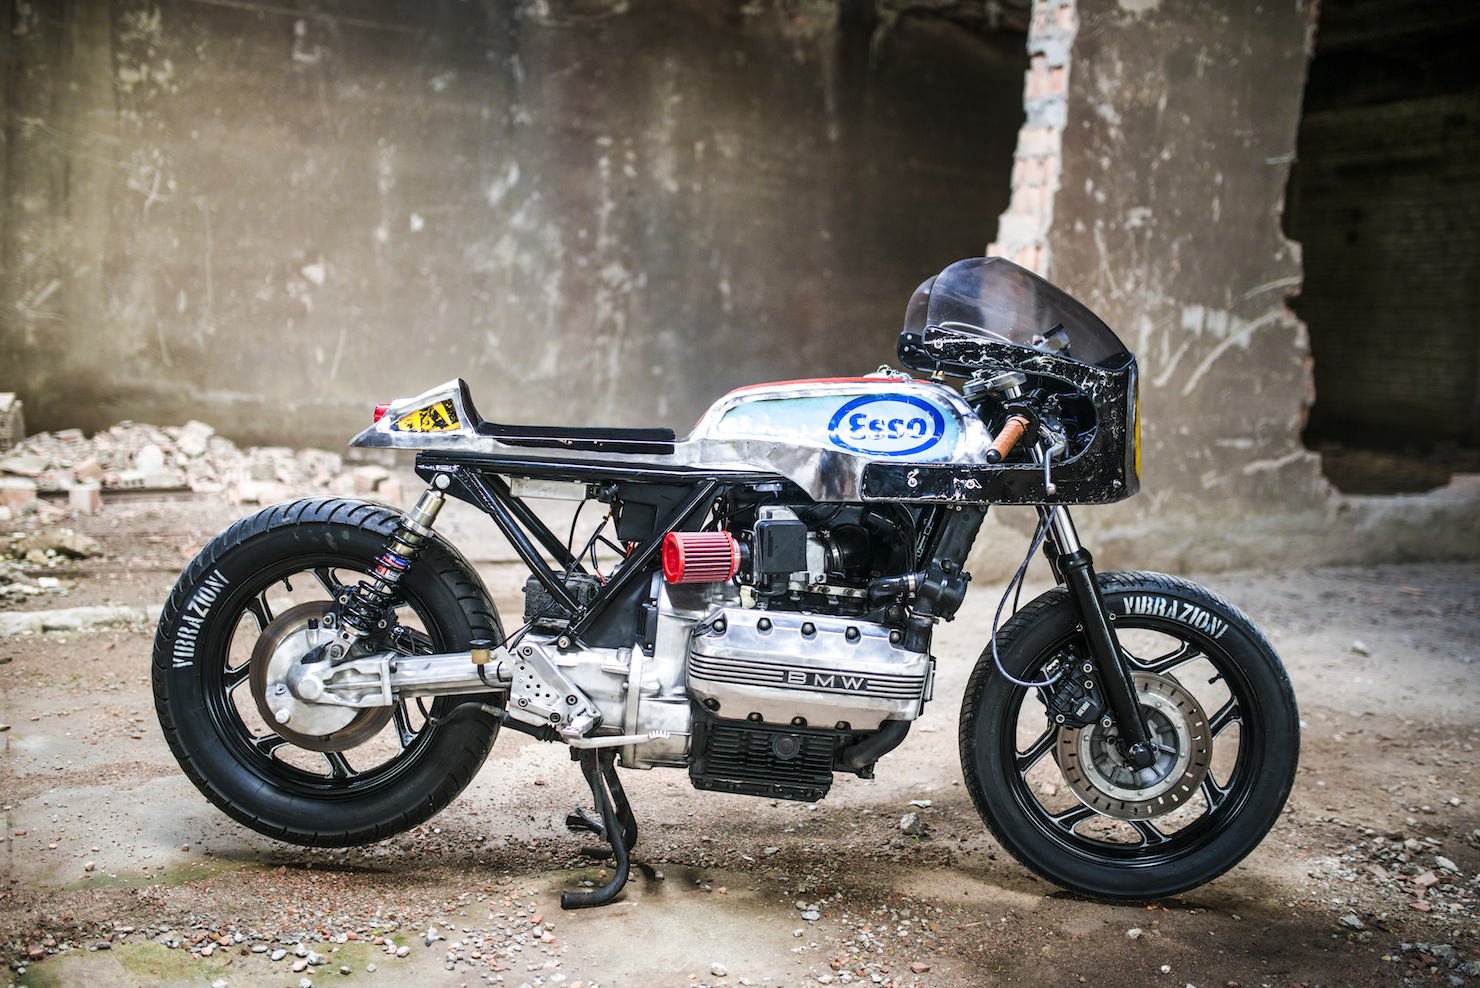 What is a bmw cafe racer